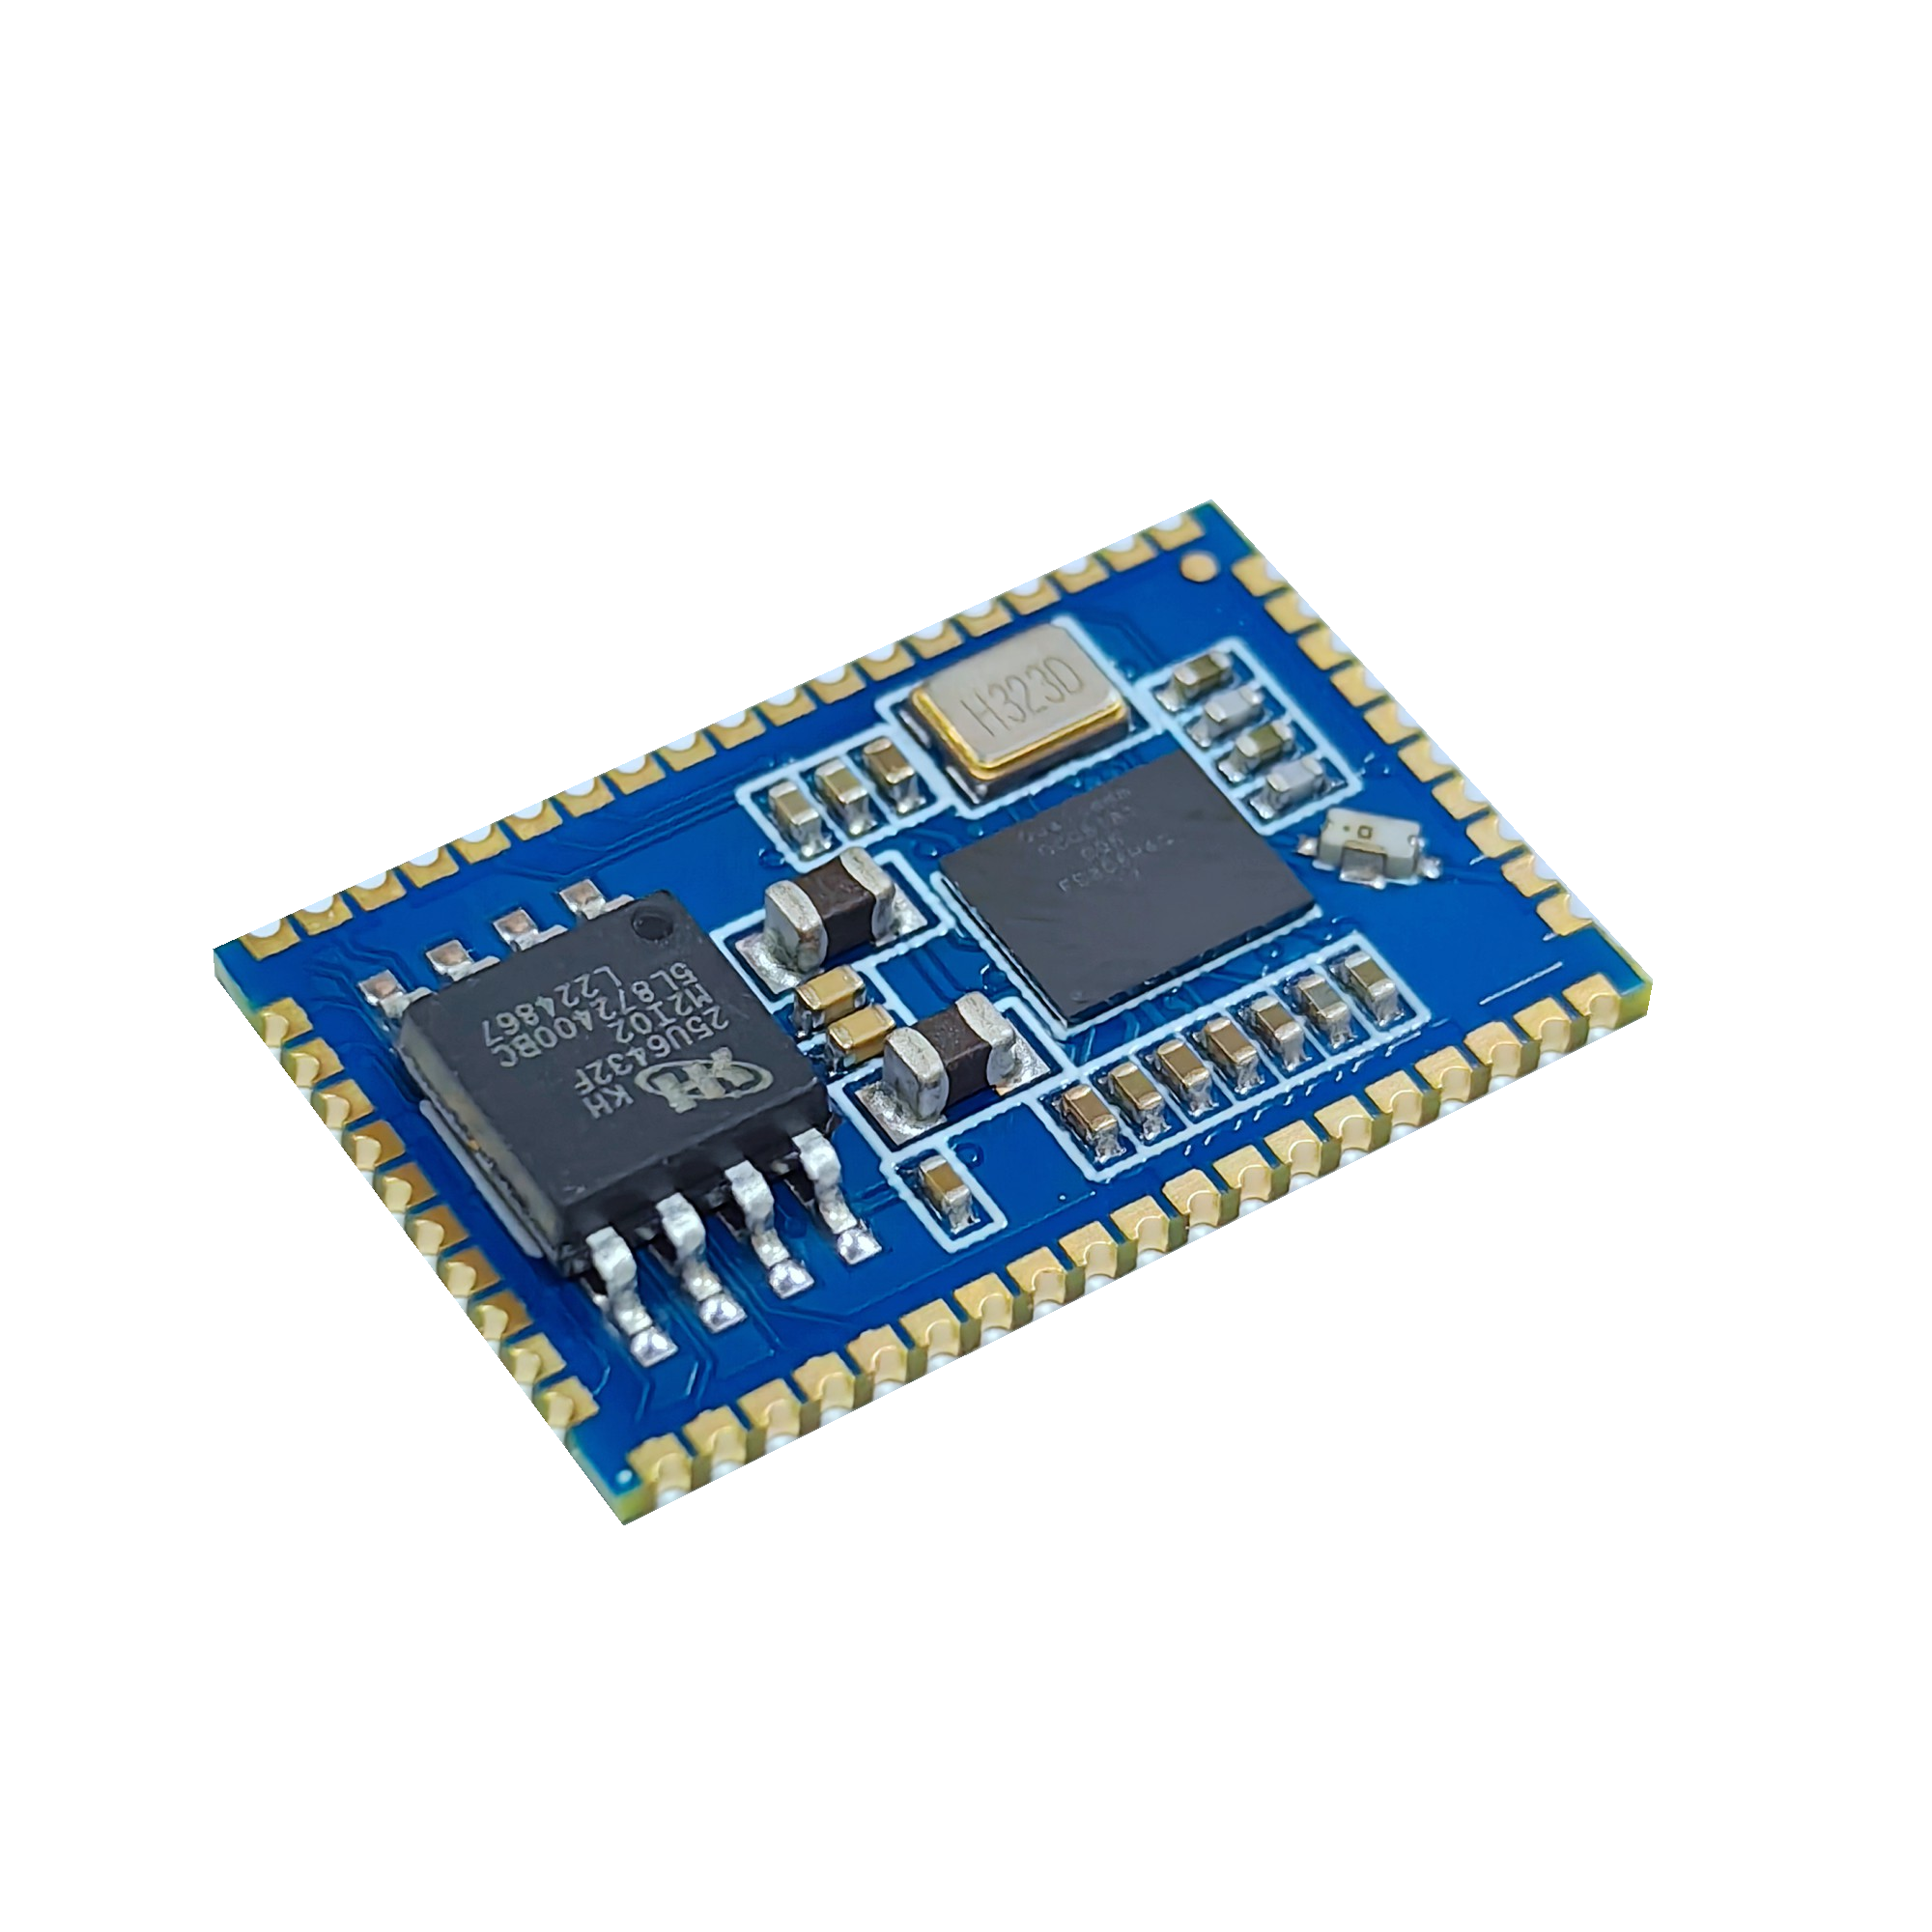 Introduction to BTM581 (QCC5181) Bluetooth module